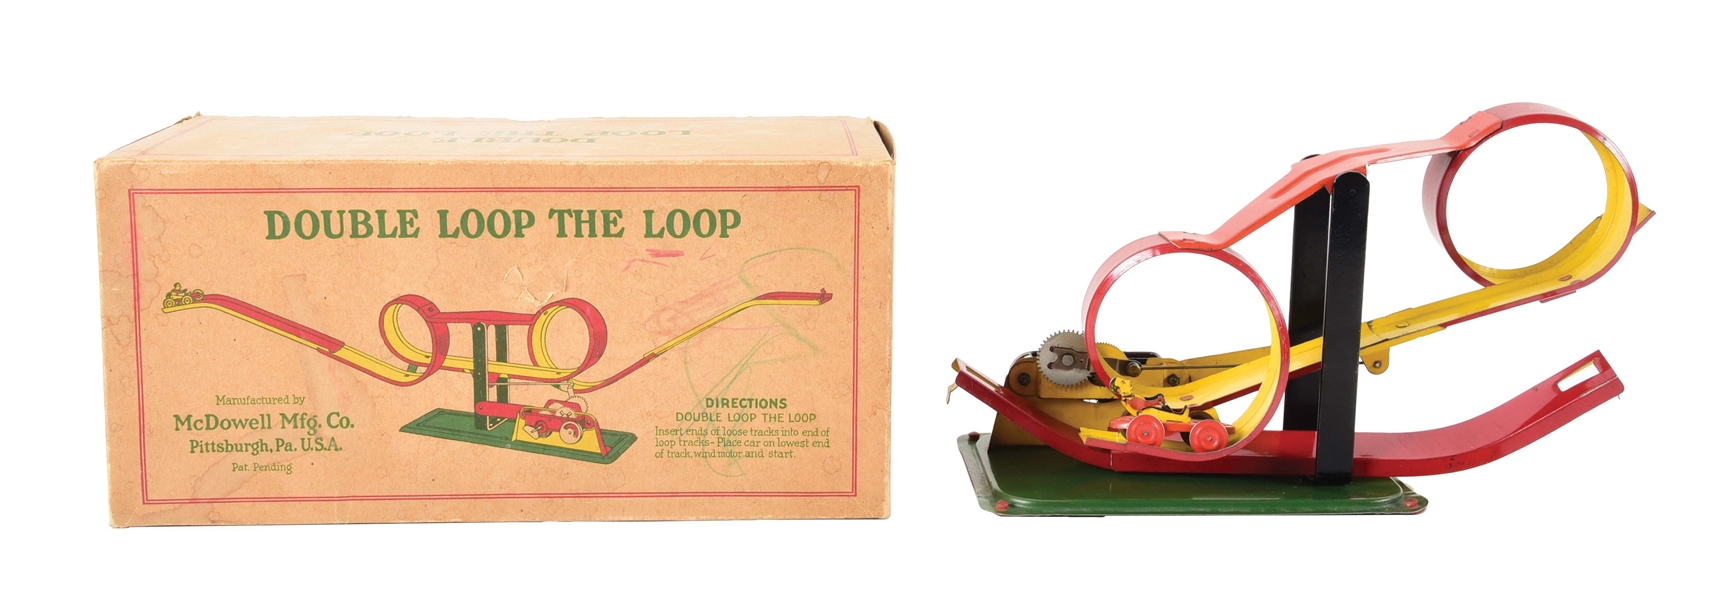 SCARCE EARLY MCDOWELL TIN WIND-UP DOUBLE LOOP THE LOOP TOY.